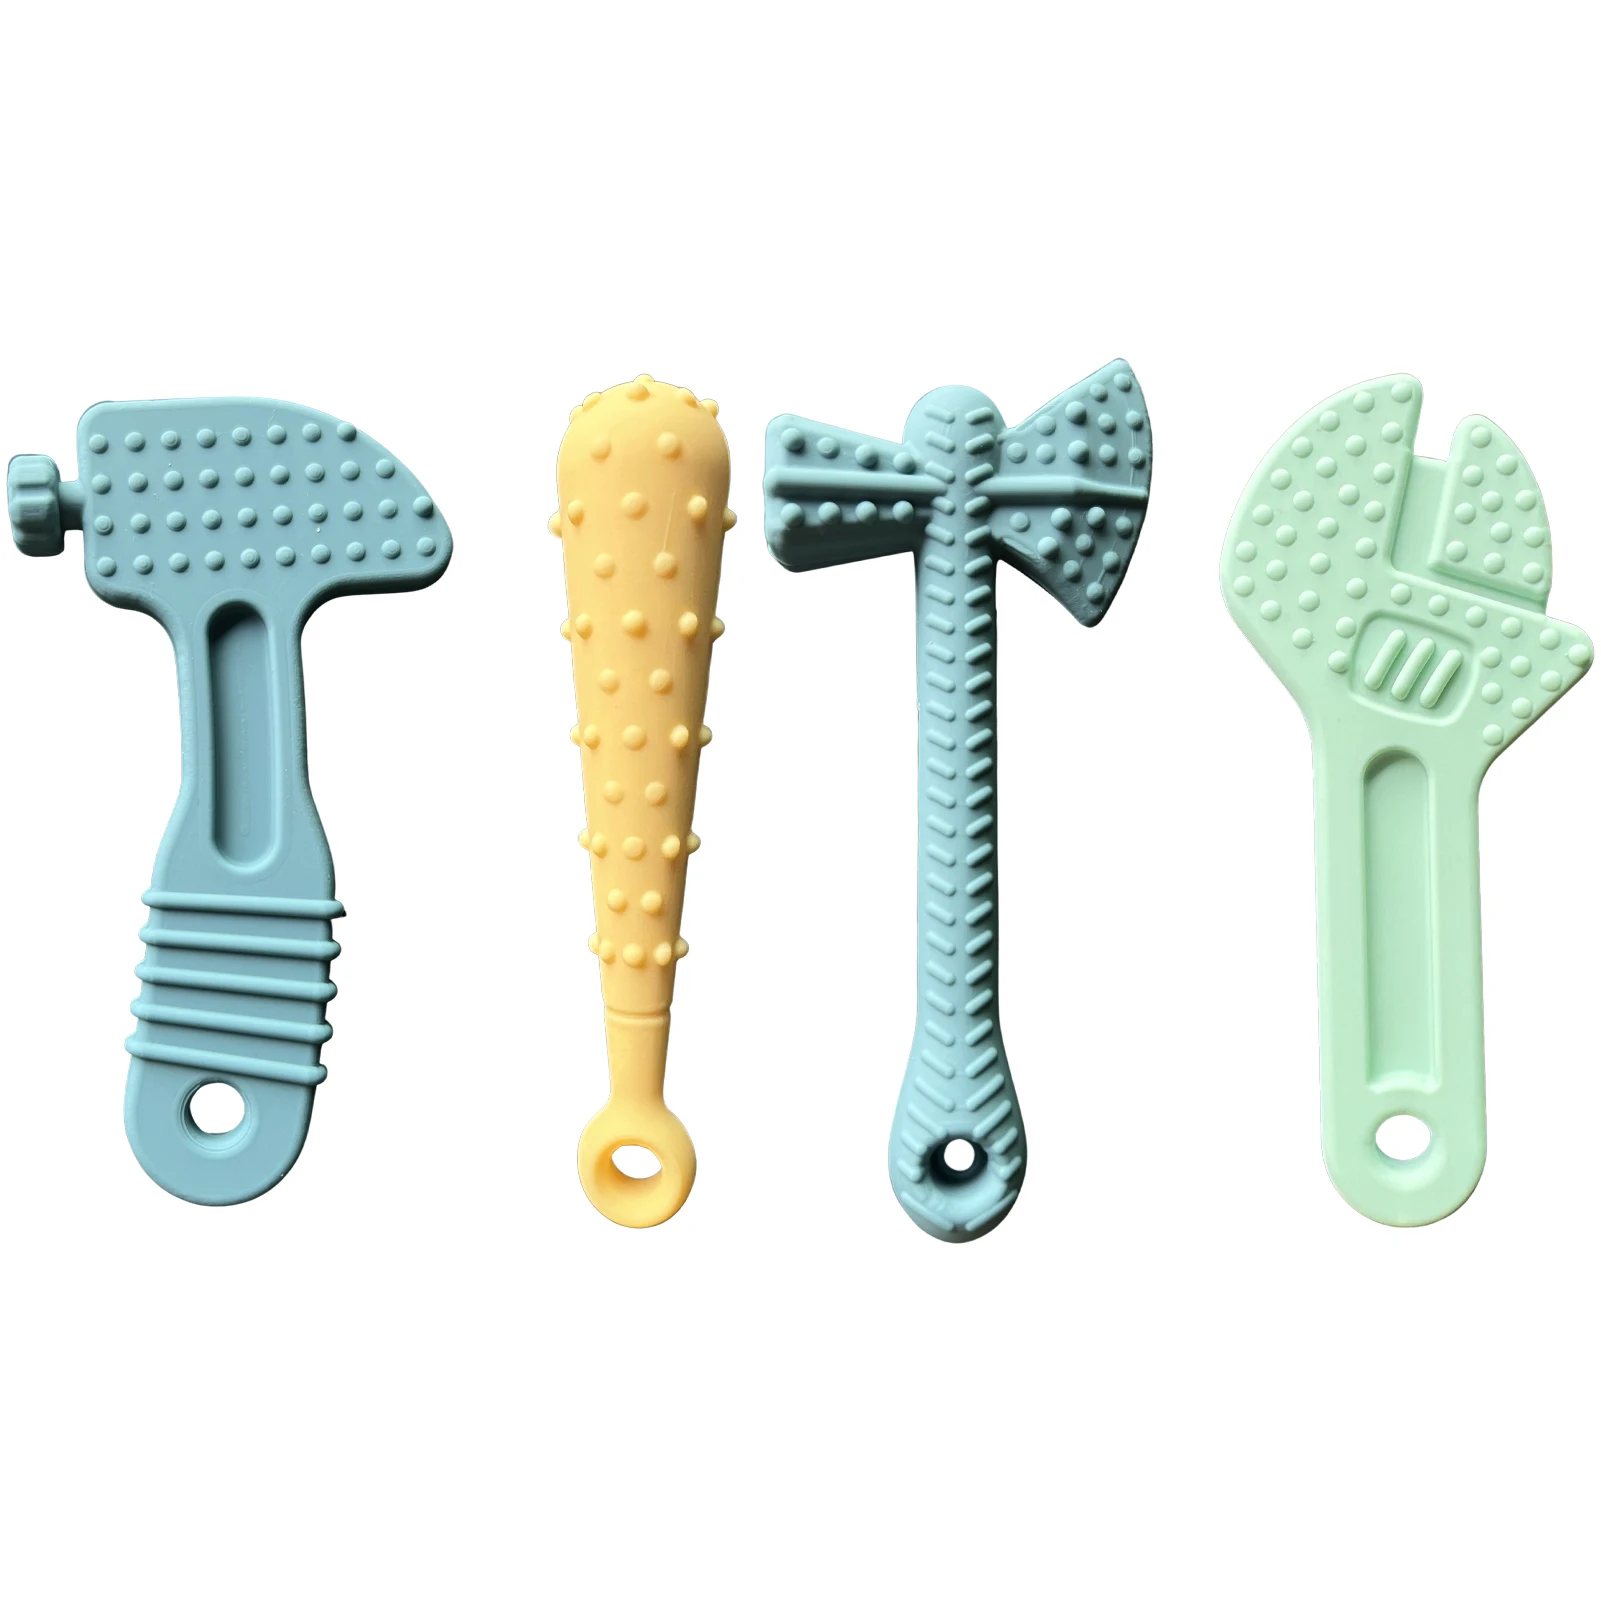 

4-PCS Baby Teething Soft Silicone Toys Tools Set Infant Chew Molar Teether Toys For 0-24 Months Boys Girls Appease Pacifier